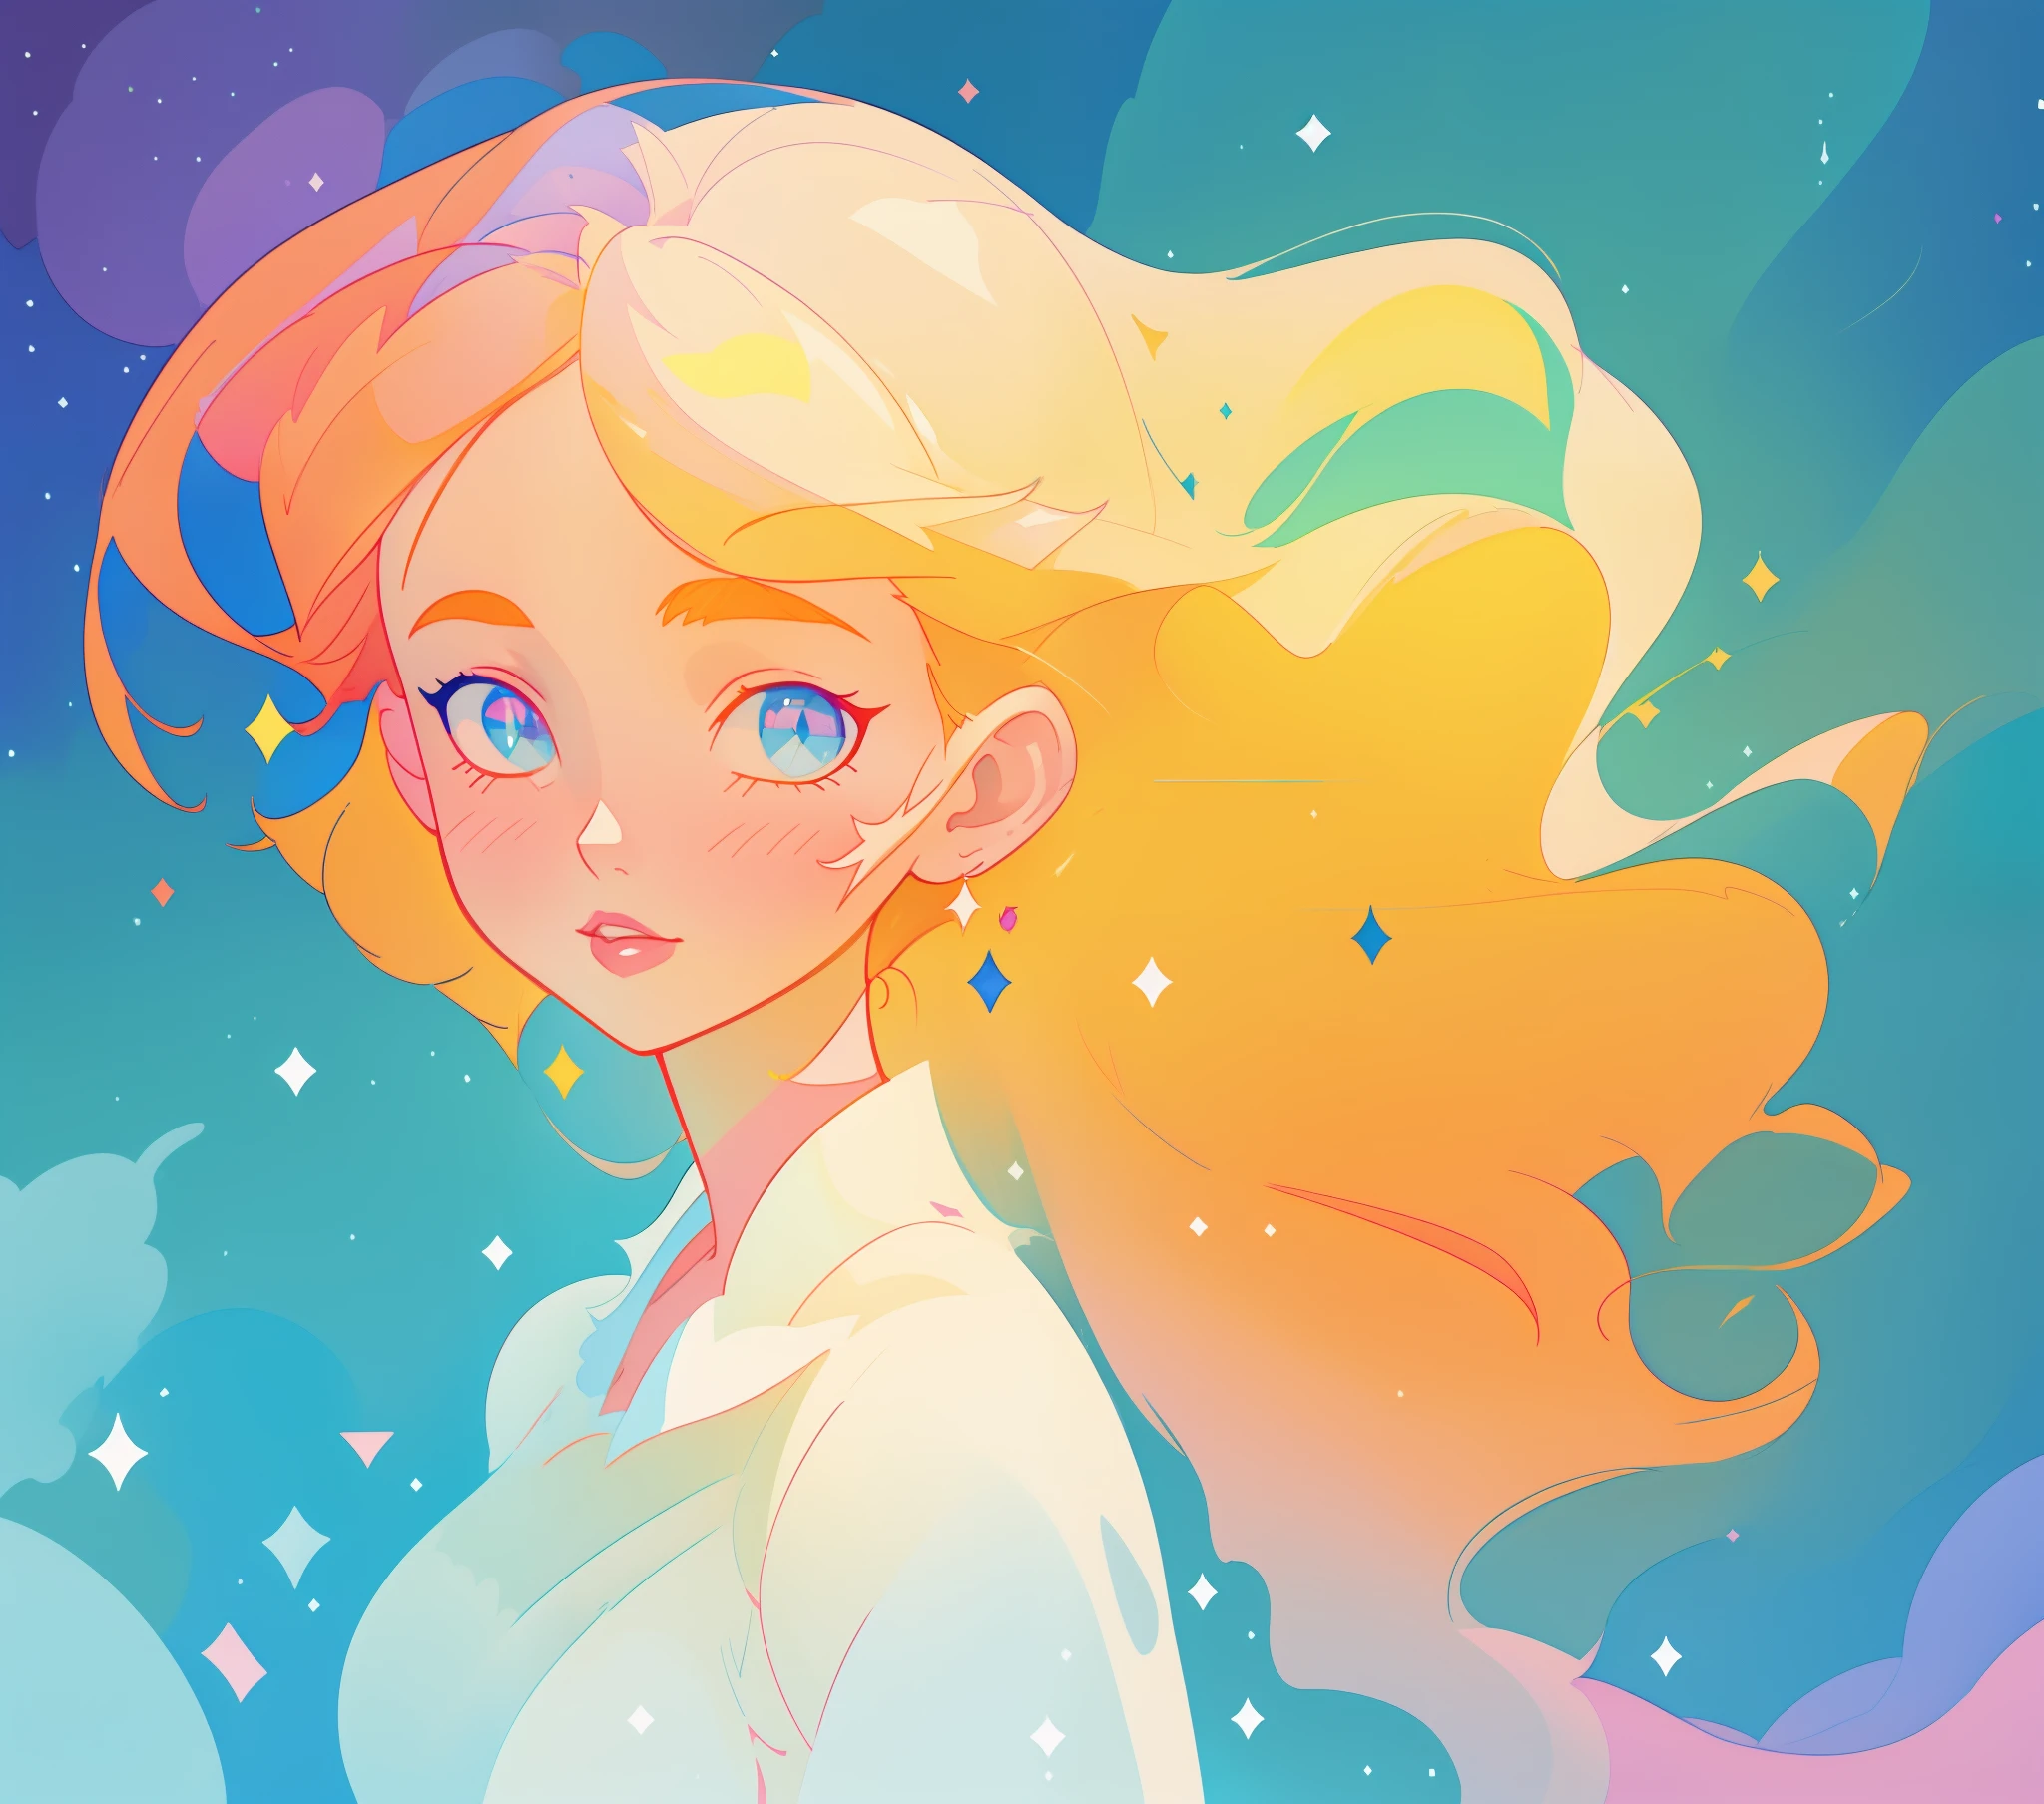 beautiful girl, flowing white gown, vibrant pastel colors, (colorful), magical lights, long flowing golden hair, inspired by Glen Keane, inspired by Lois van Baarle, disney art style, by Lois van Baarle, glowing aura around her, by Glen Keane, jen bartel, glowing lights! digital painting, flowing glowing hair, glowing flowing hair, beautiful digital illustration, fantasia background, whimsical, magical, fantasy, beautiful face, ((masterpiece, best quality)), intricate details, highly detailed, sharp focus, 8k resolution, sparkling detailed eyes, liquid watercolor